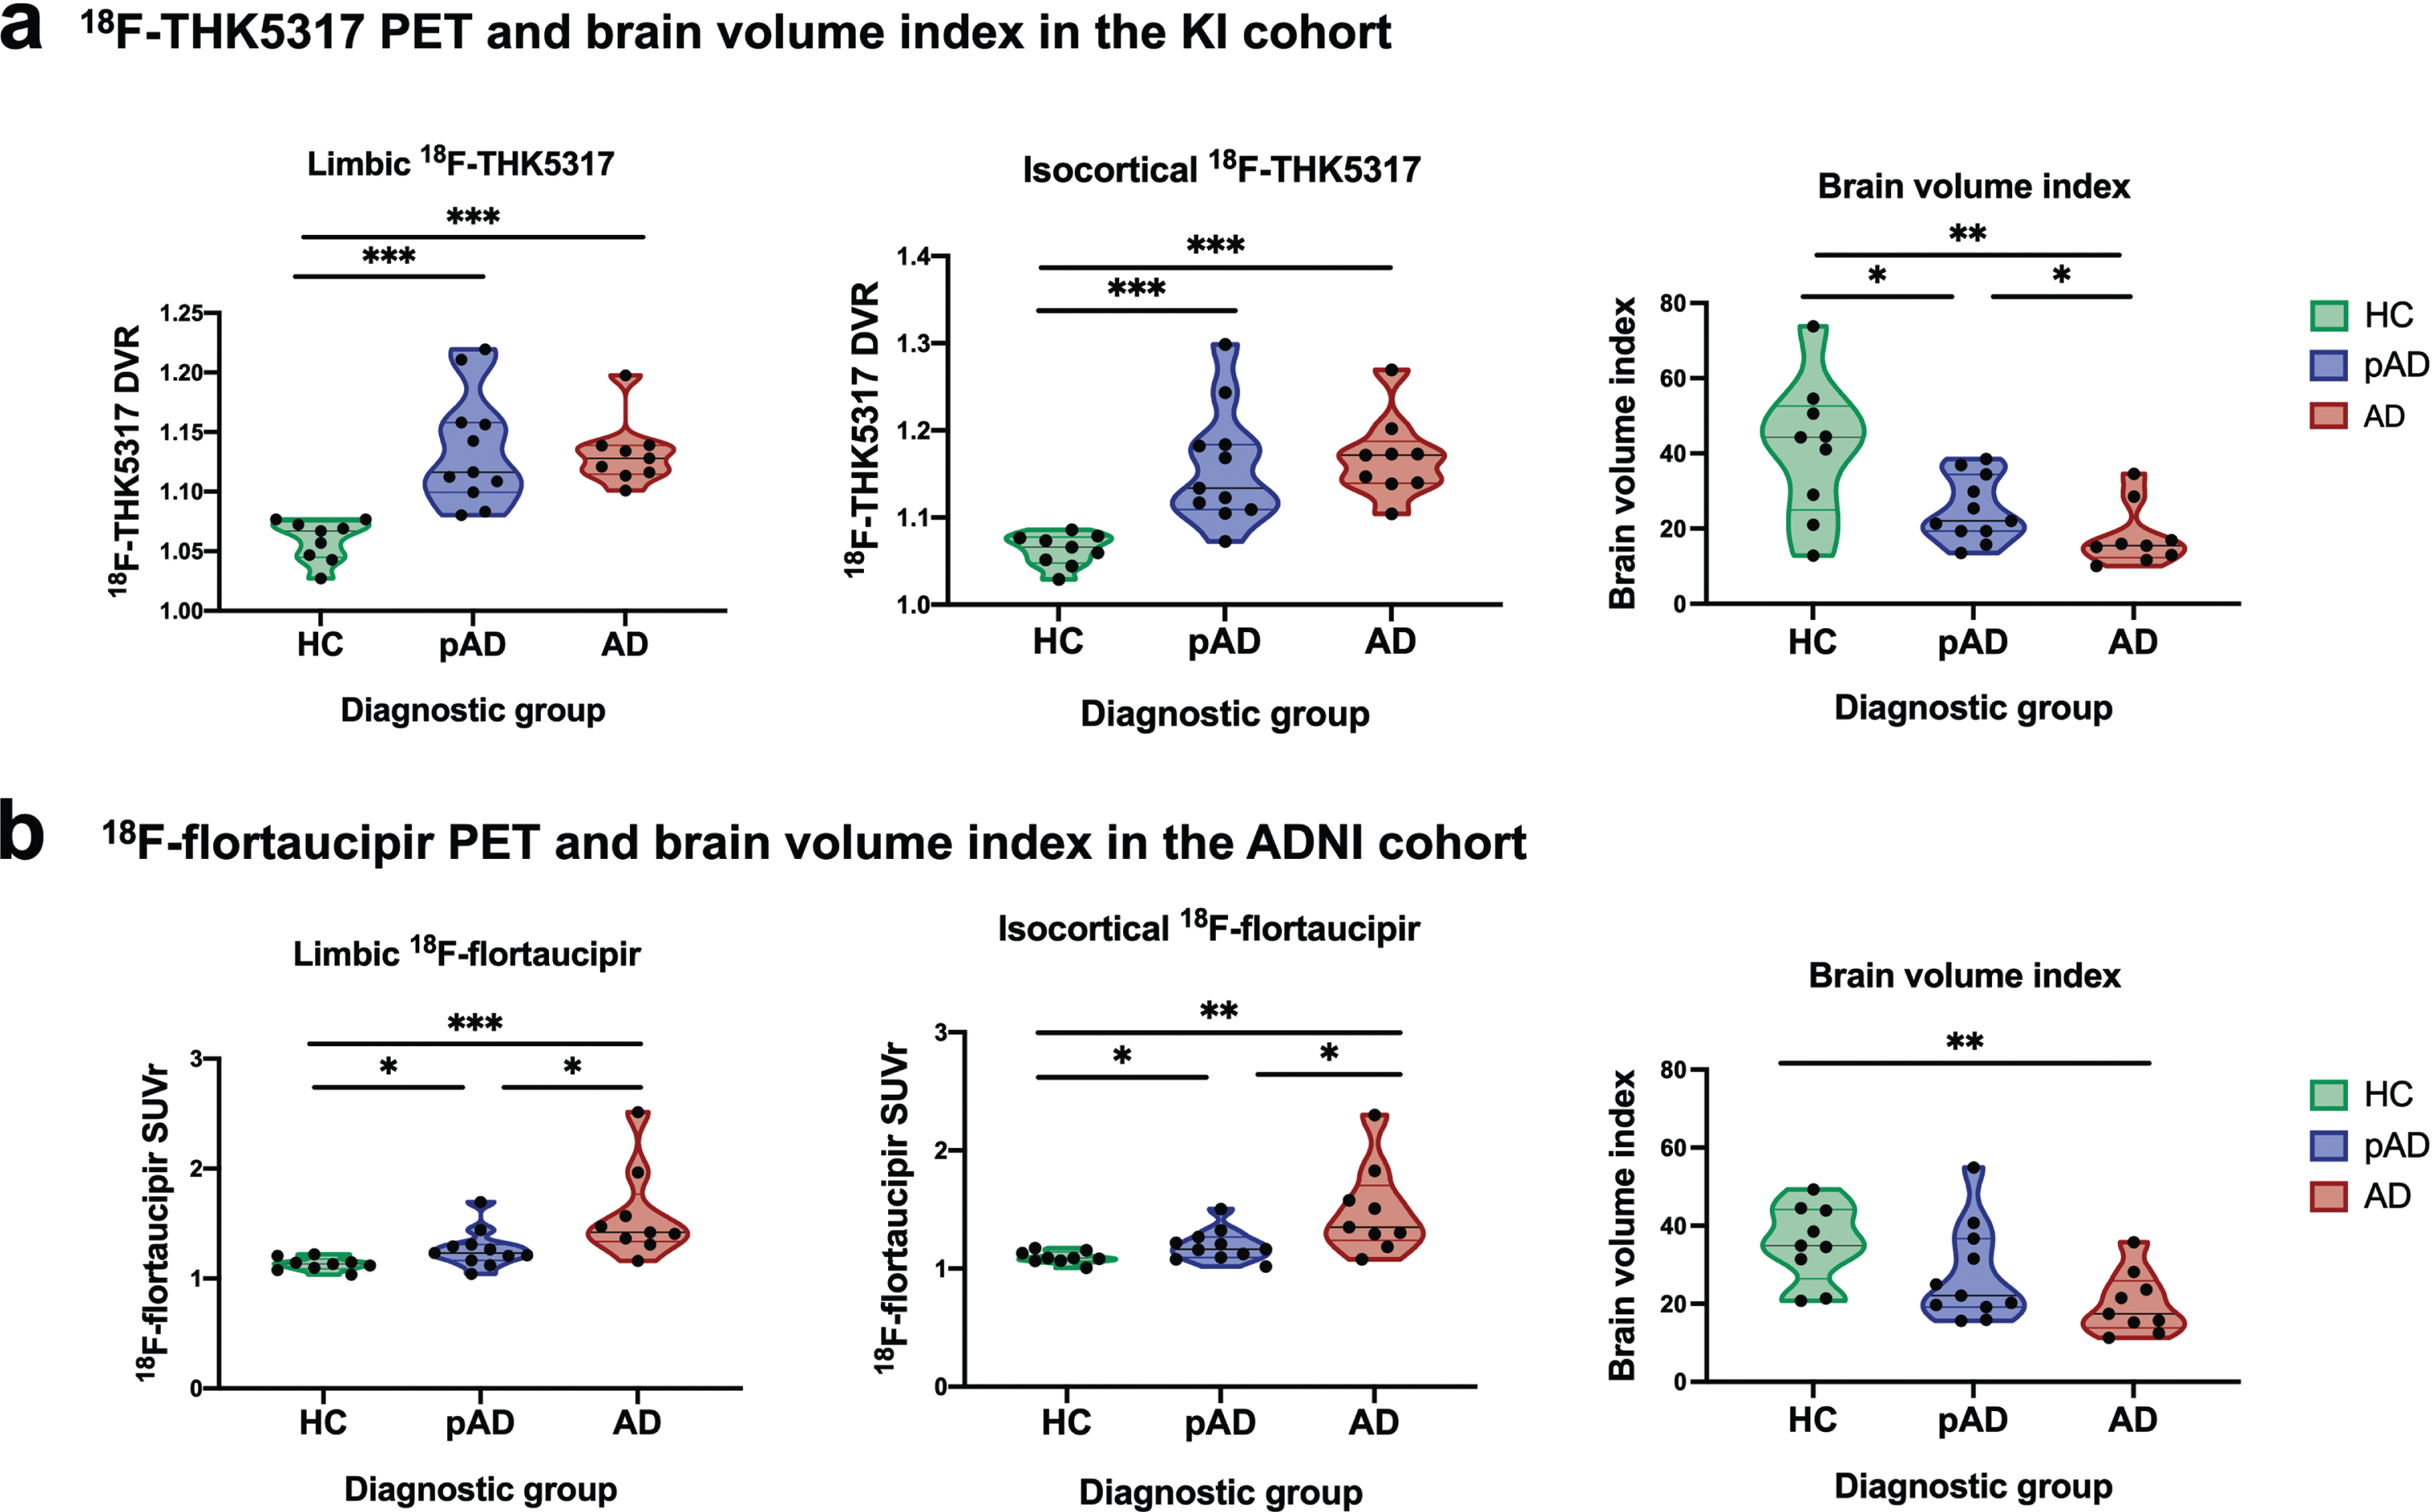 Violin plots illustrating patterns of tau PET uptake as measured by 18F-THK5317 and 18F-flortaucipir in the limbic and iscortical composite regions, as well as brain volume index across healthy controls, prodromal AD and AD dementia groups in the KI (a) and ADNI (b) cohorts. AD, Alzheimer’s disease dementia; DVR, distribution volume ratio; pAD, prodromal Alzheimer’s disease; SUVr, standardized uptake volume ratio. Statistical significance of discriminative ability as measured by receiver operating characteristic (ROC) area under the curve (AUC) analyses is indicated: *p < 0.05, **p < 0.01, ***p < 0.001.